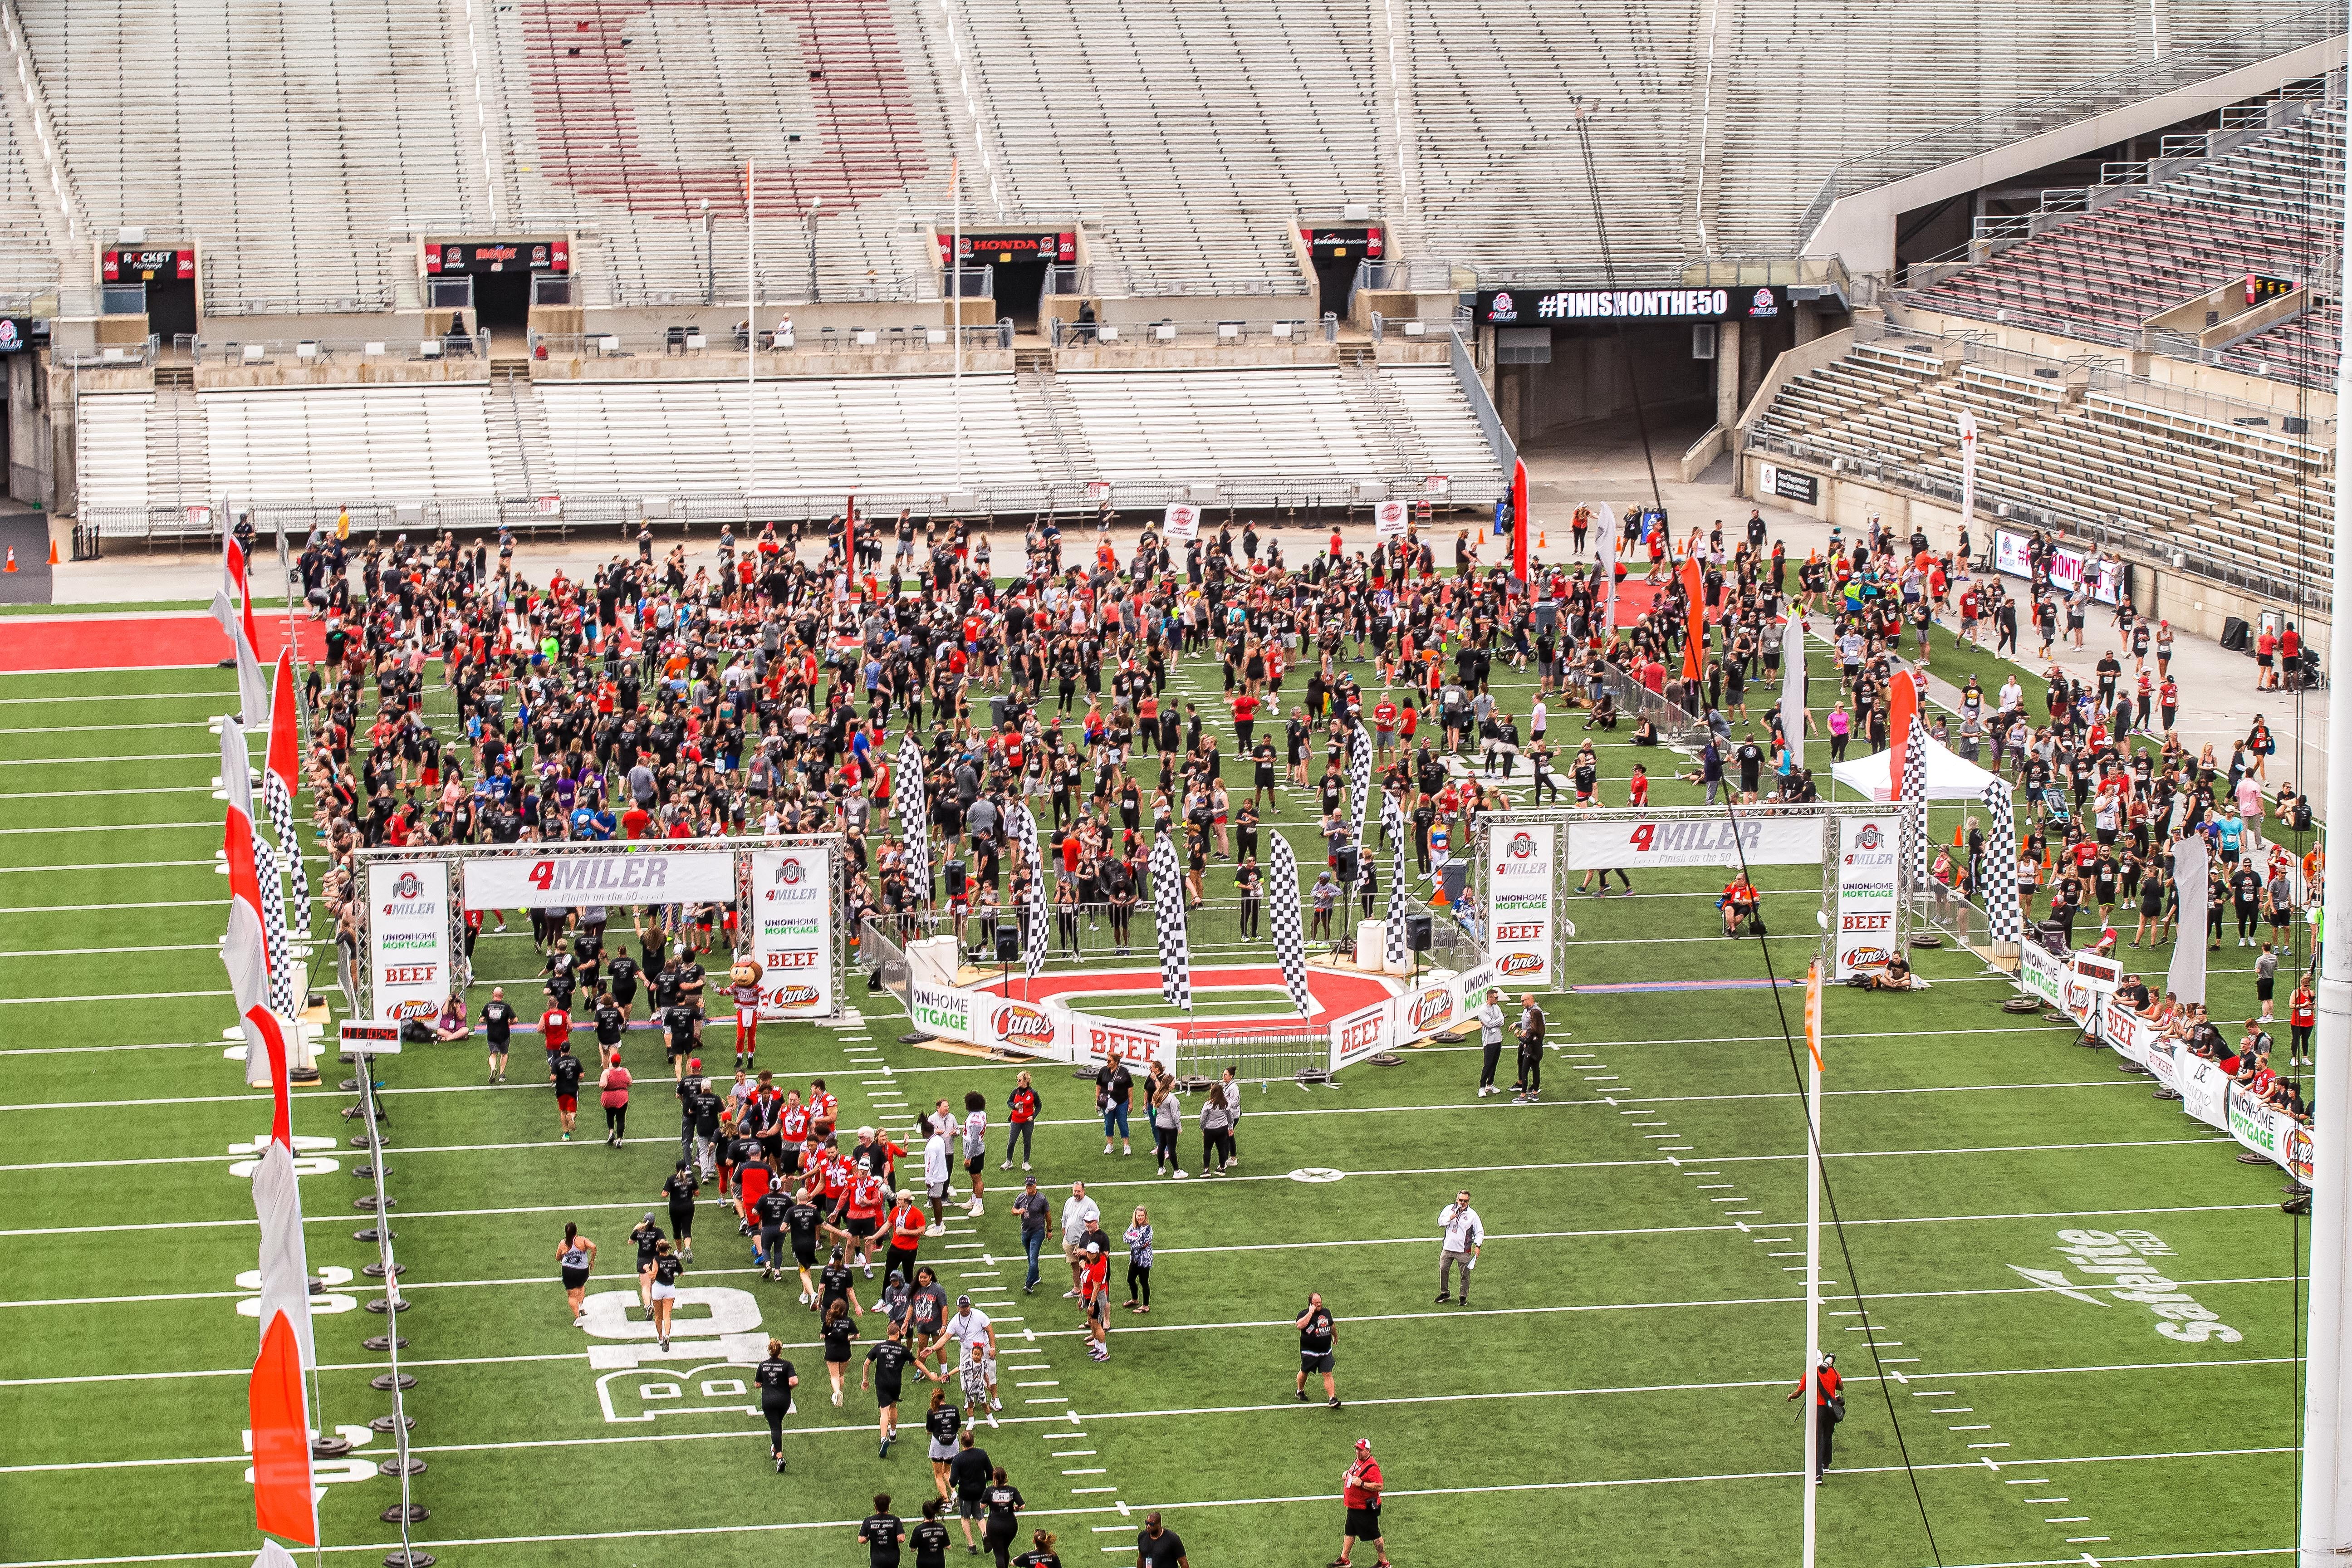 Previous "The Ohio State 4 Miler" participants finish the race by crossing the Ohio Stadium's 50-yard line. Credit: M3S Sports